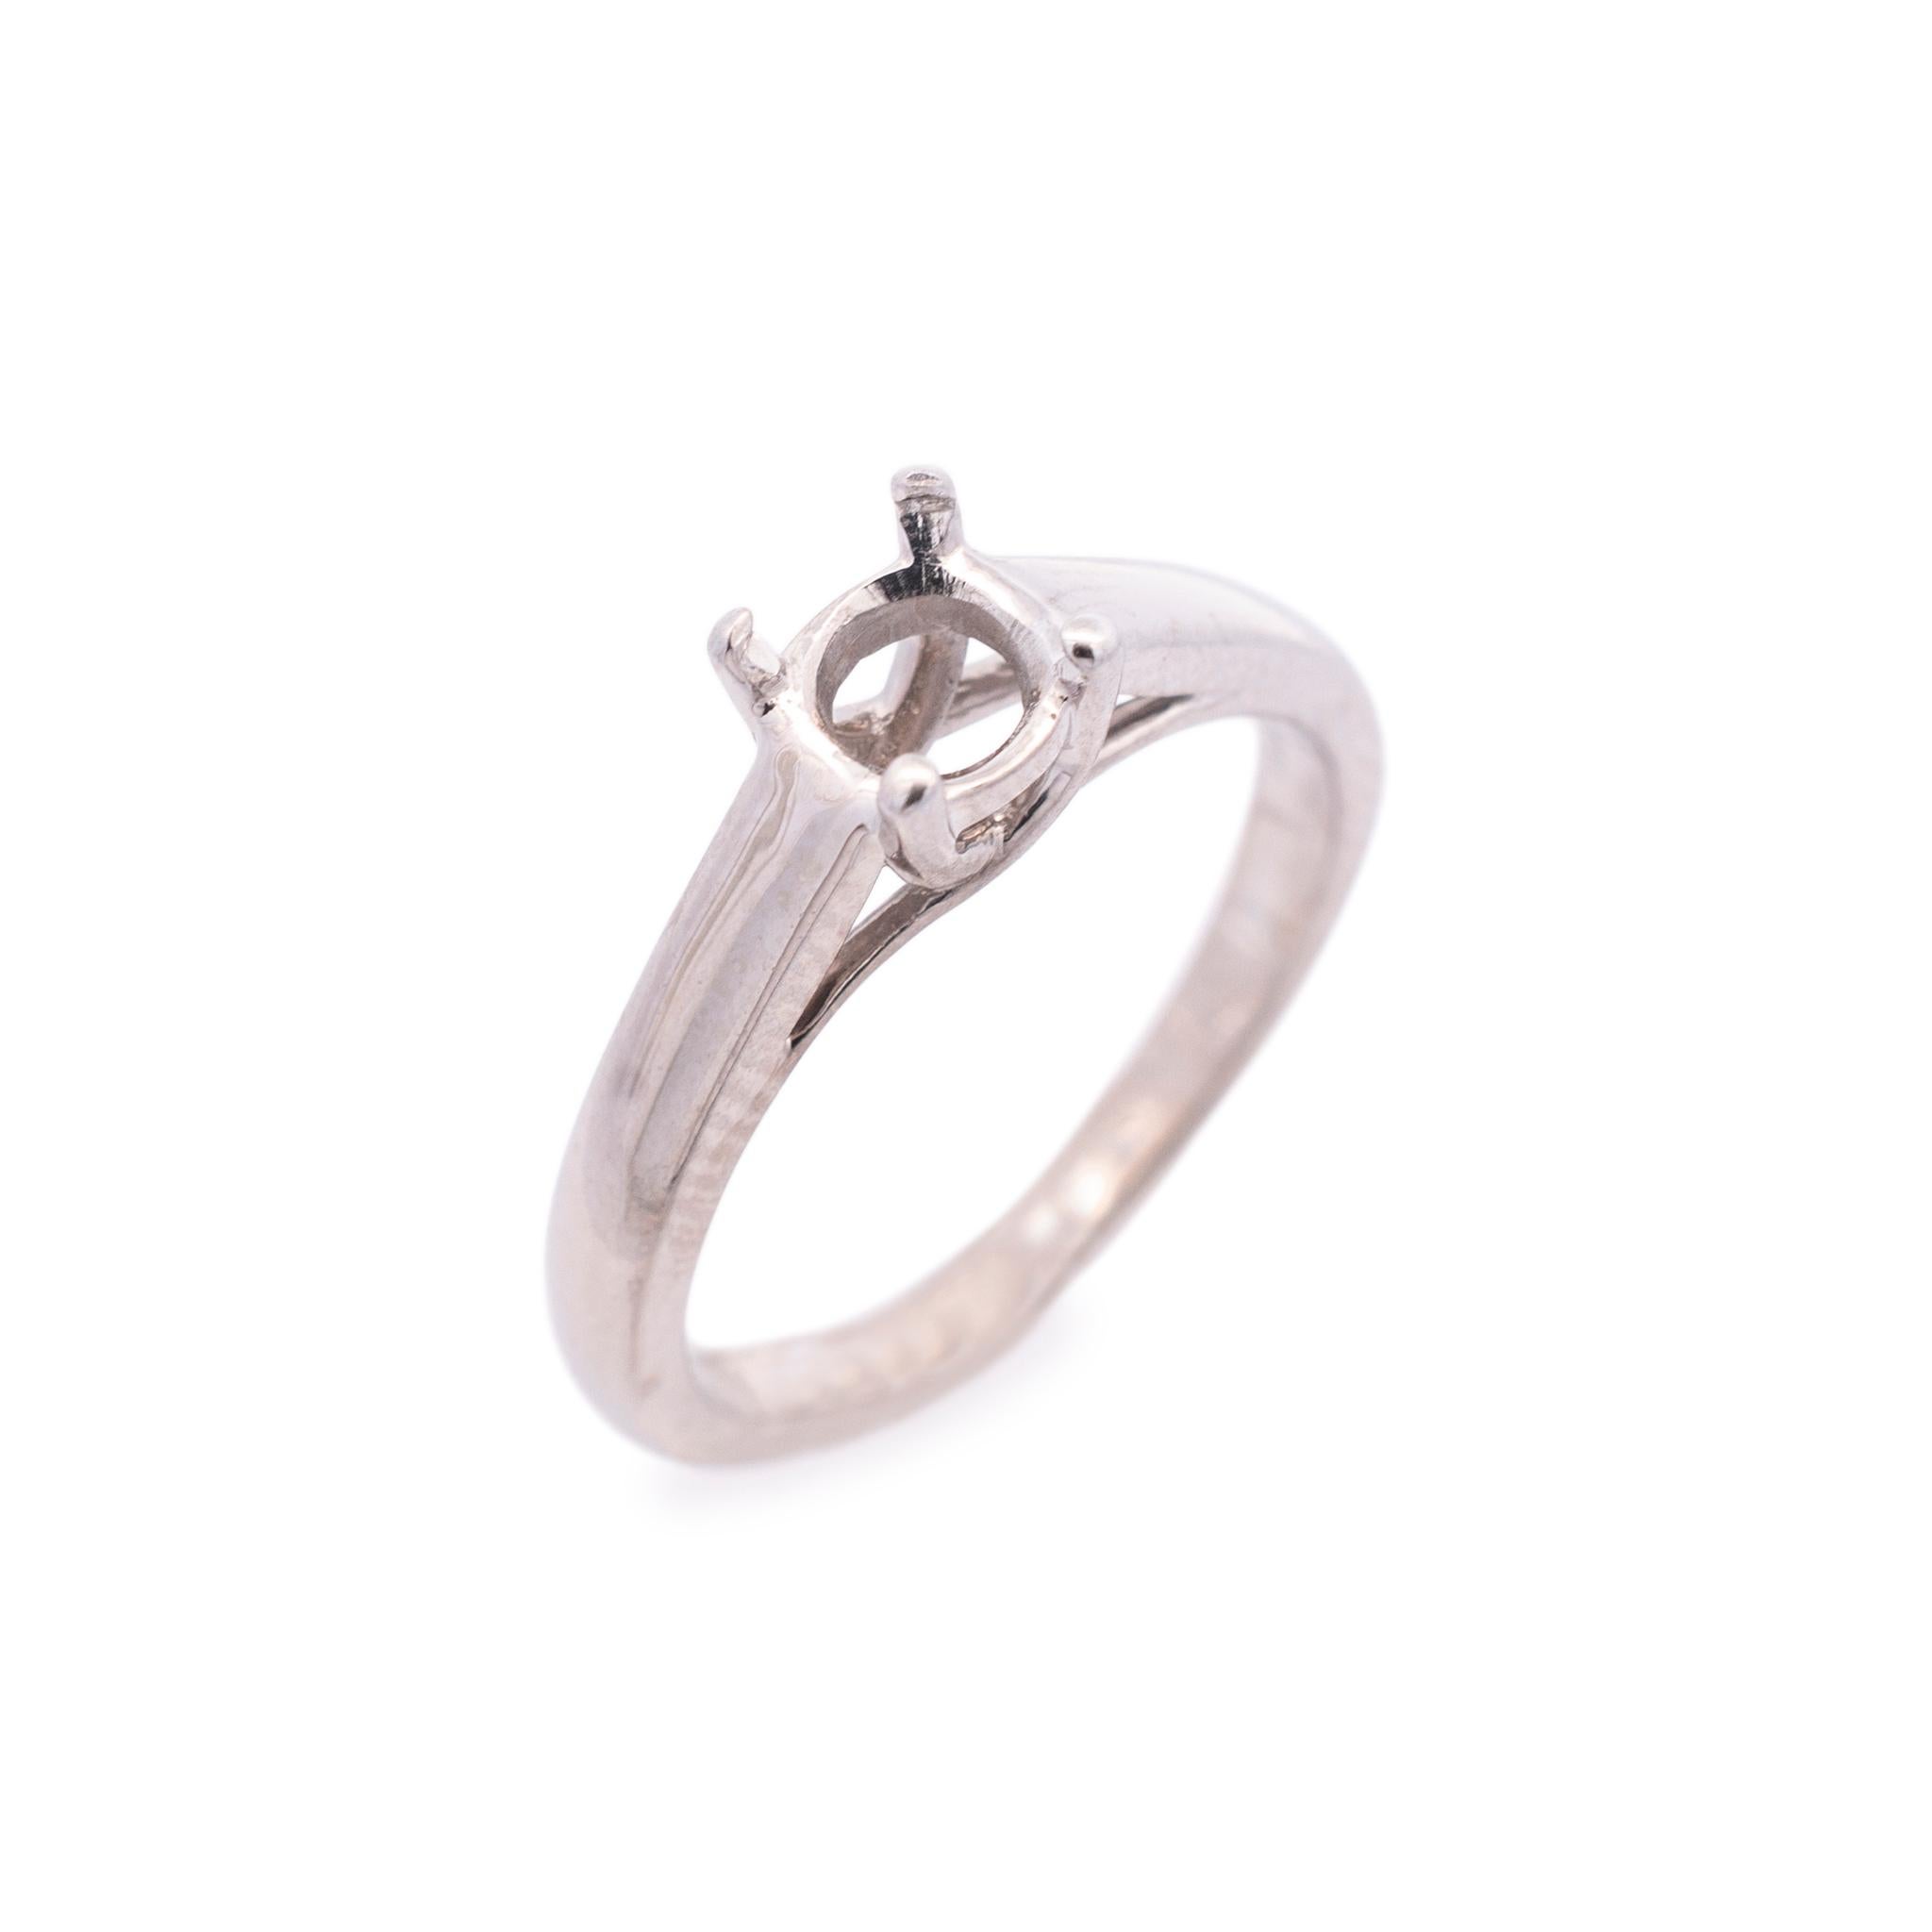 Gender: Ladies

Metal Type: 14K White Gold

Size: 6.5

Shank Width: 2.10mm

Stone Measurements: 5.6mm to 5.8mm Diameter

Weight: 3.56 grams

Ladies 14K white gold engagement semi-mount ring with a half round shank.
Engraved with 